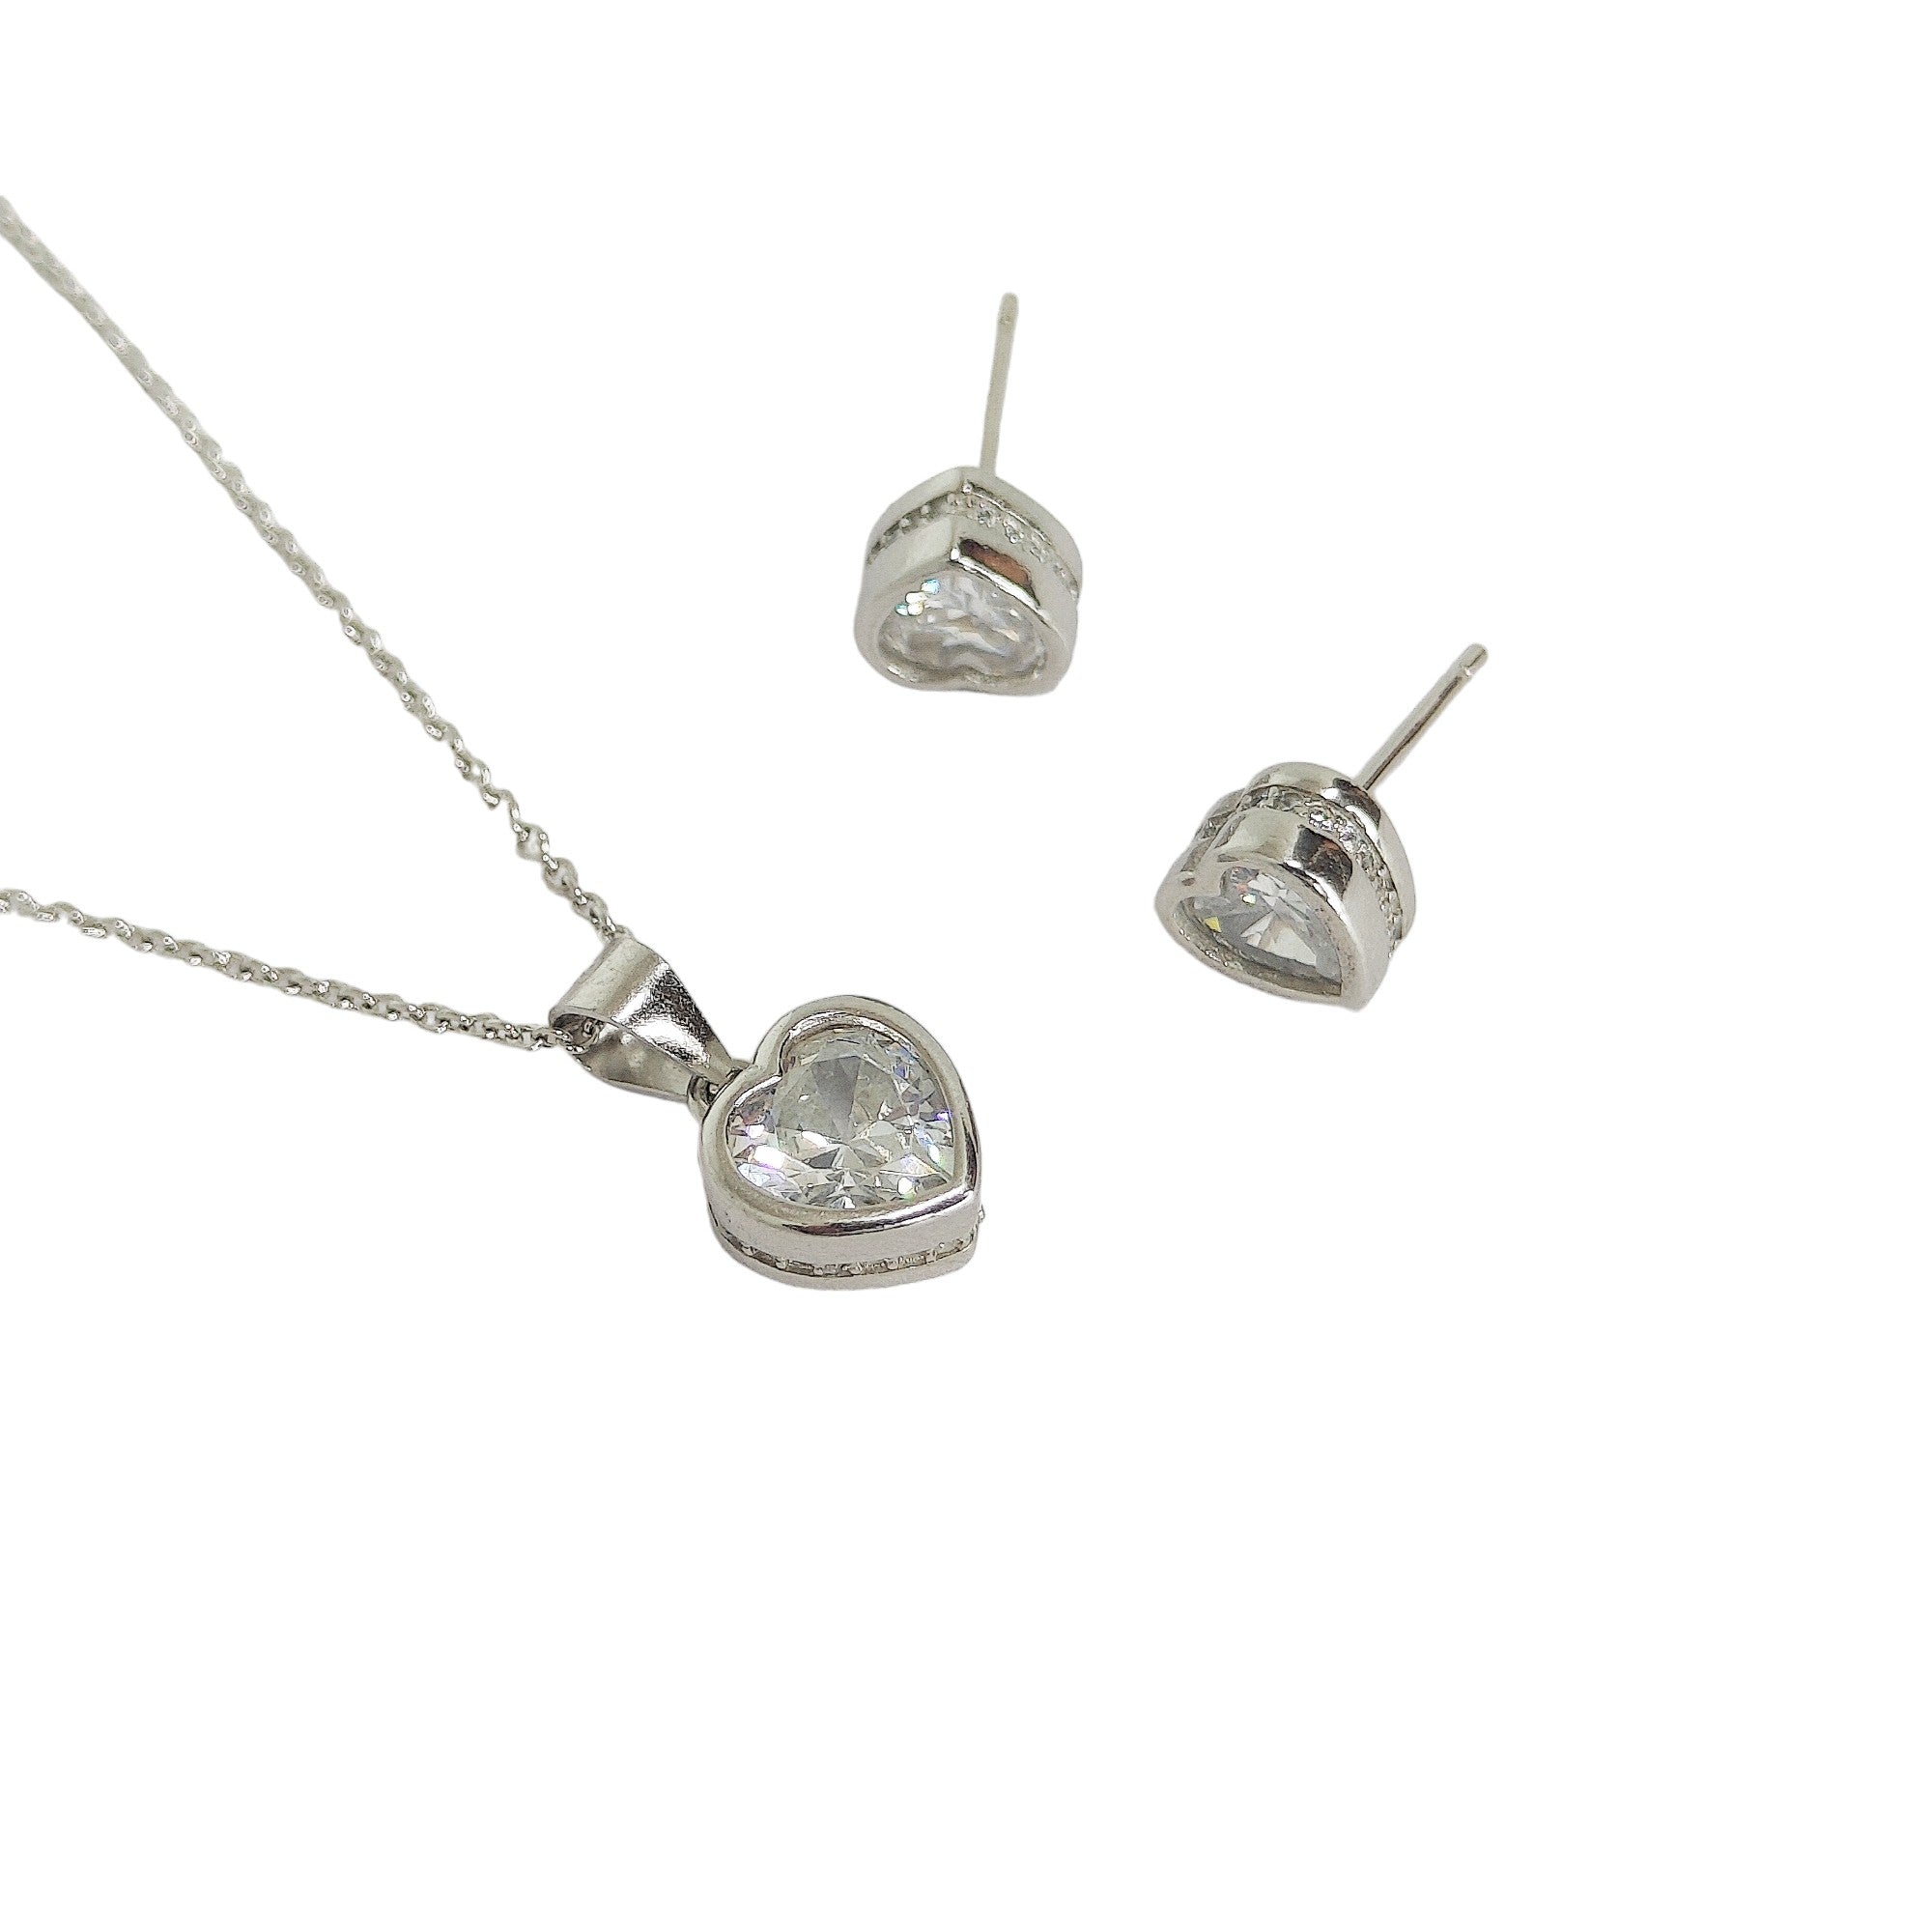 The Heart - Silver Pendent Set With Chain for Women - Rivansh